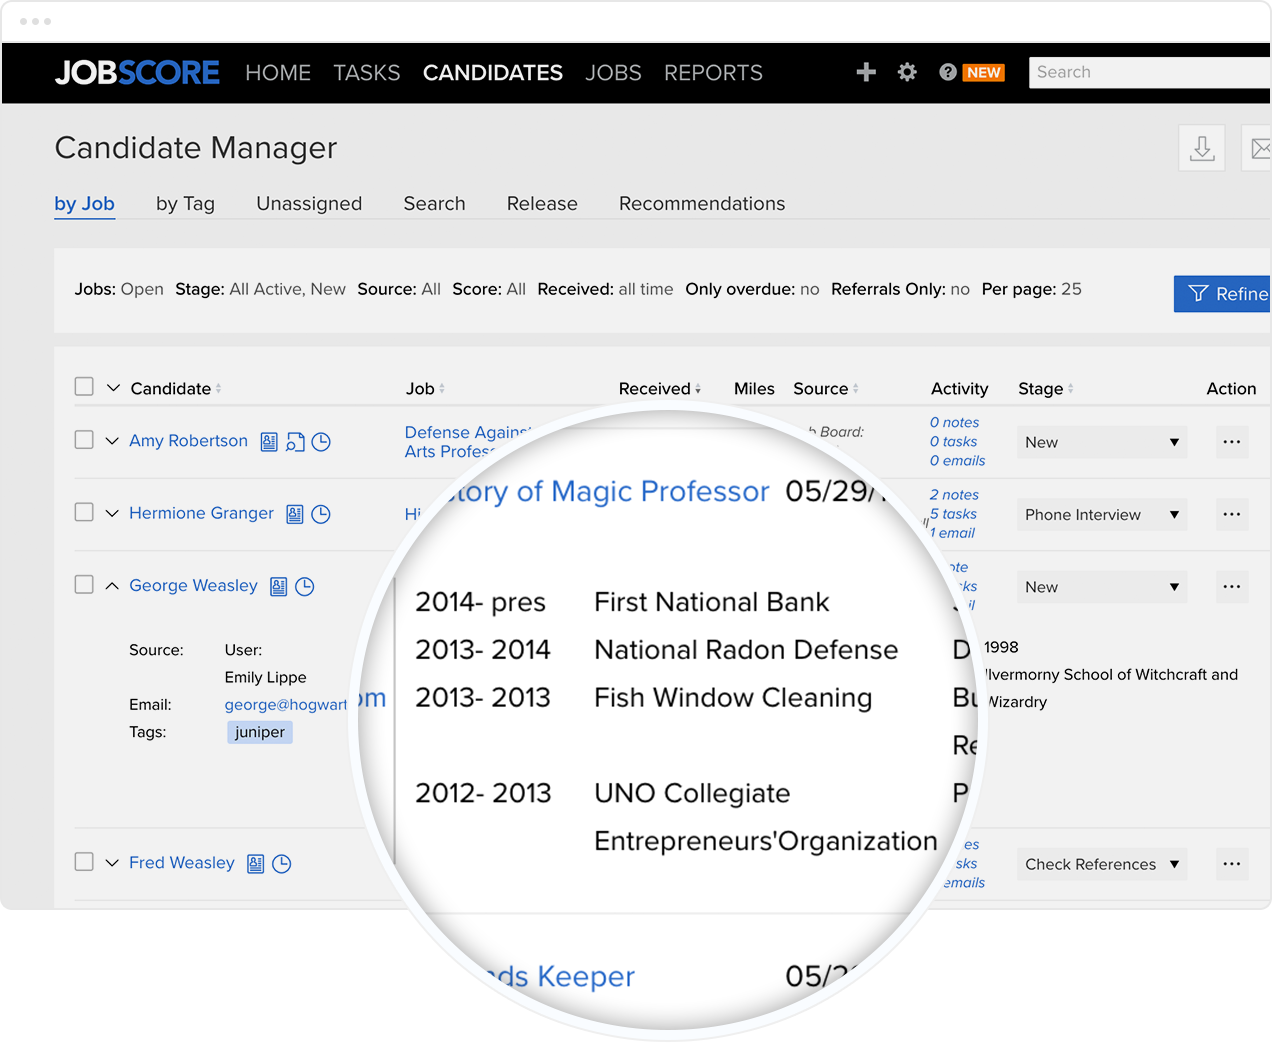 Magnified candidate resume overview using JobScore's Candidate Manager software.